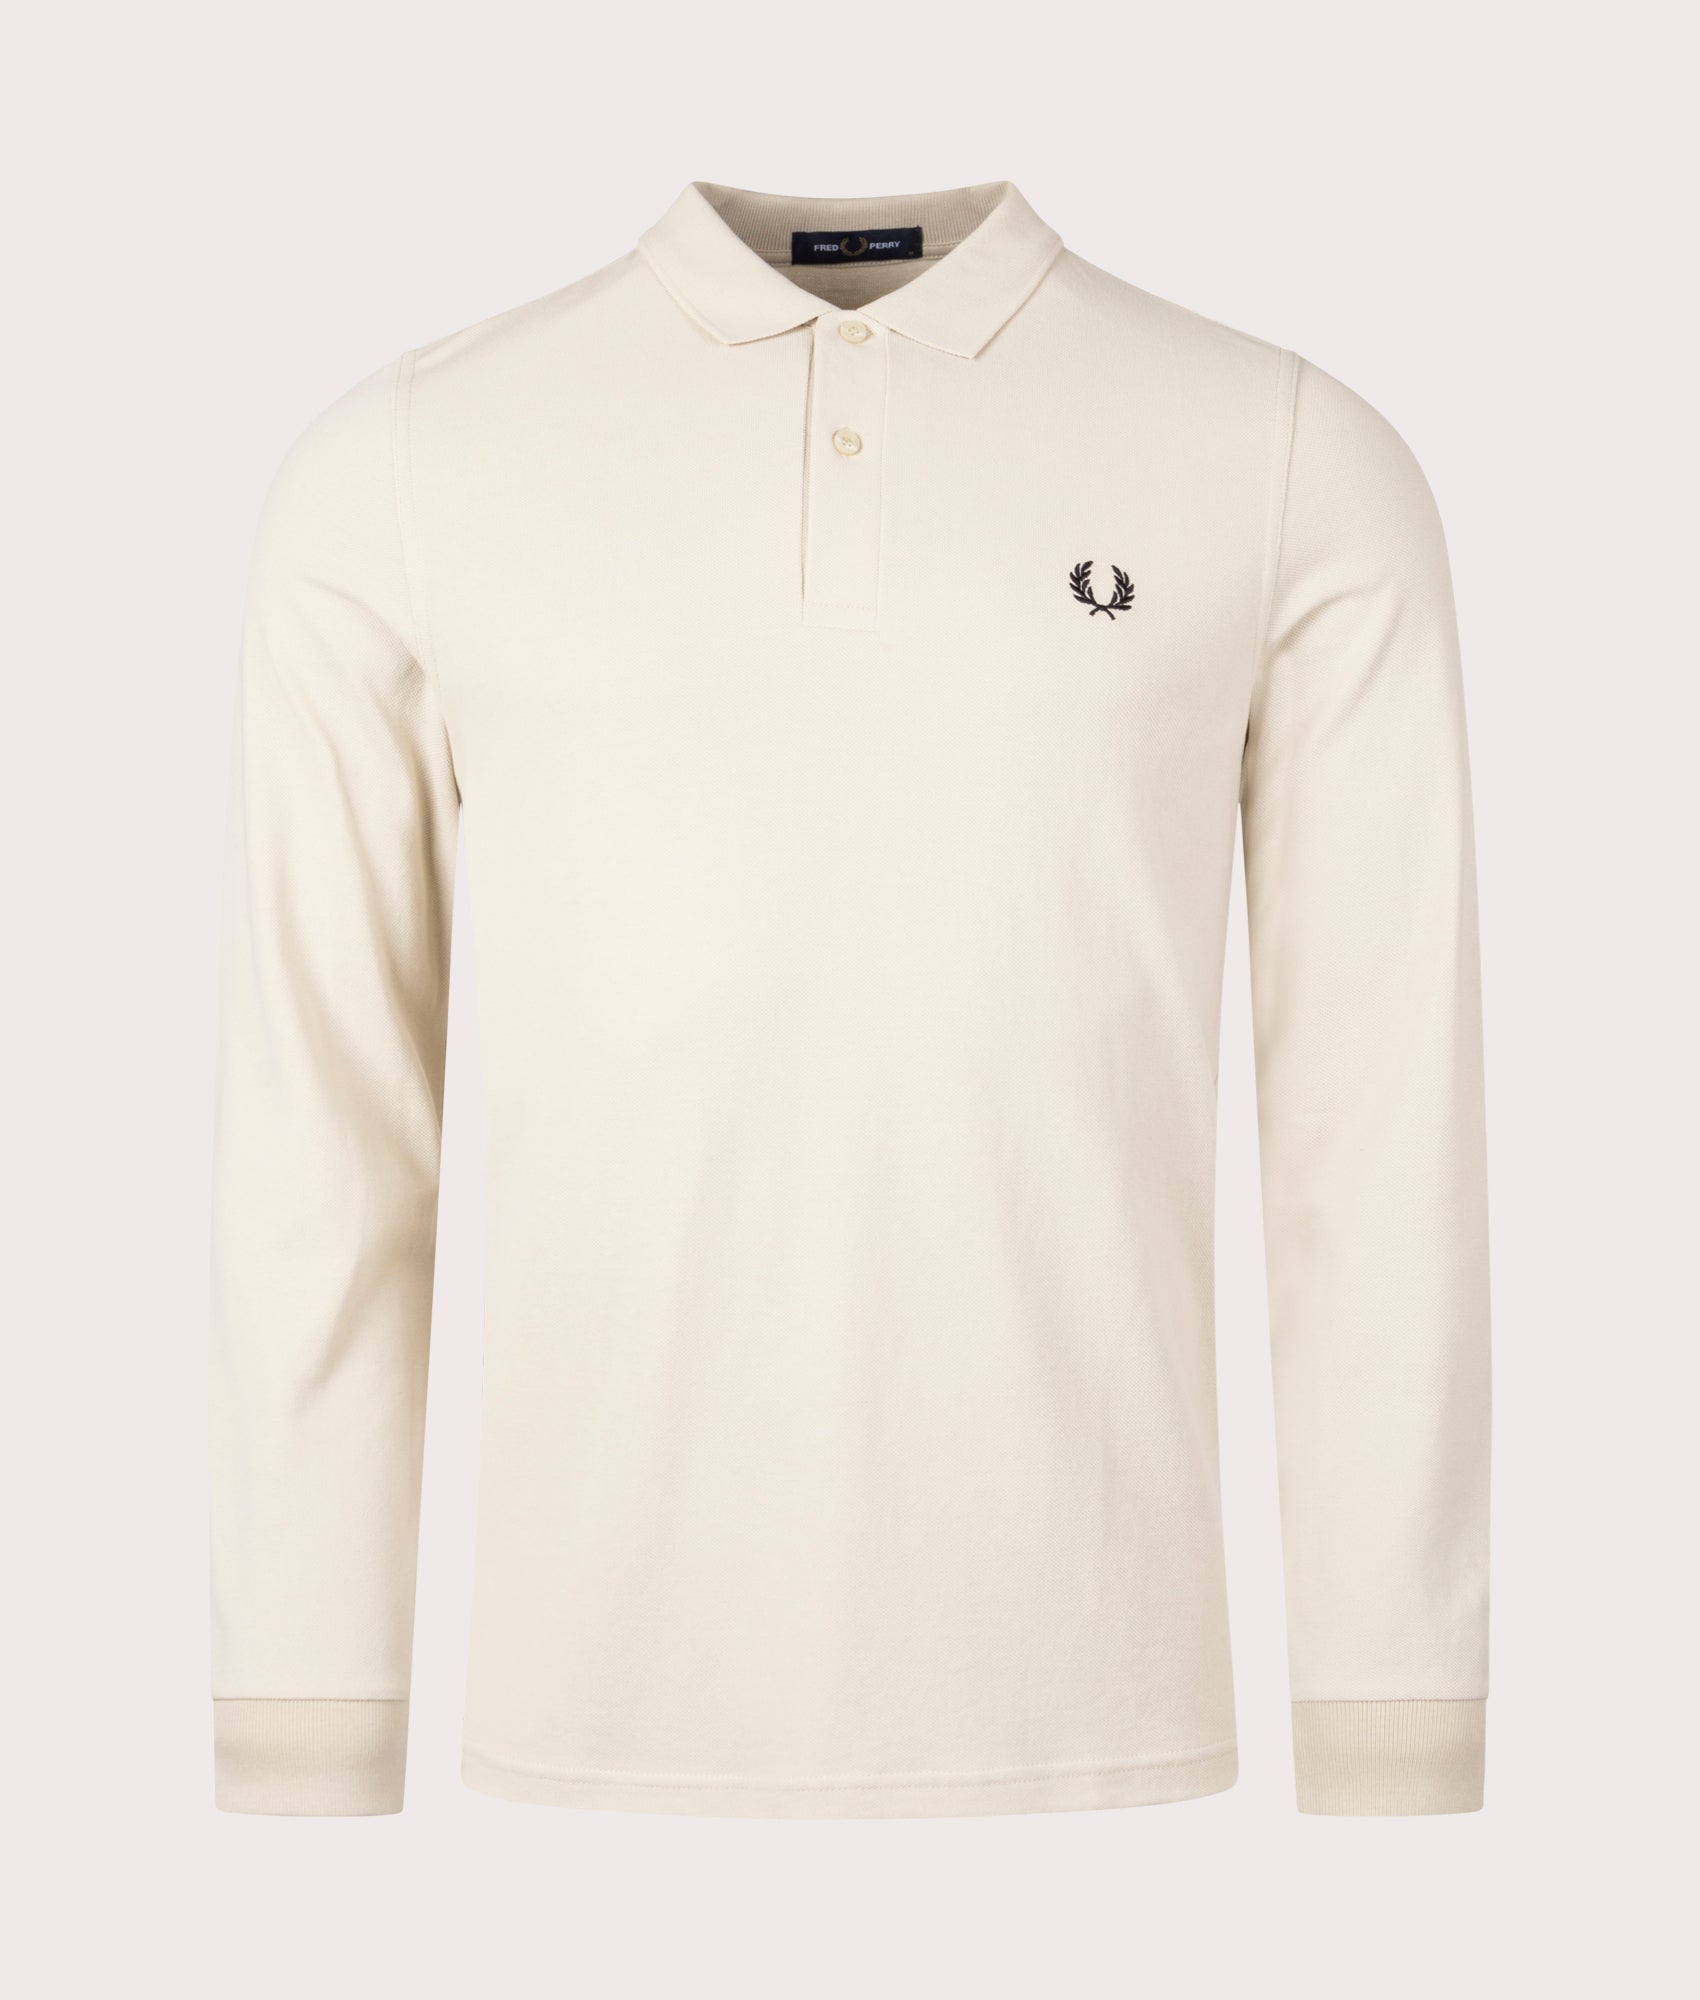 Fred Perry Mens Long Sleeve Tennis Polo Shirt - Colour: T04 Oatmeal/Black - Size: XXL